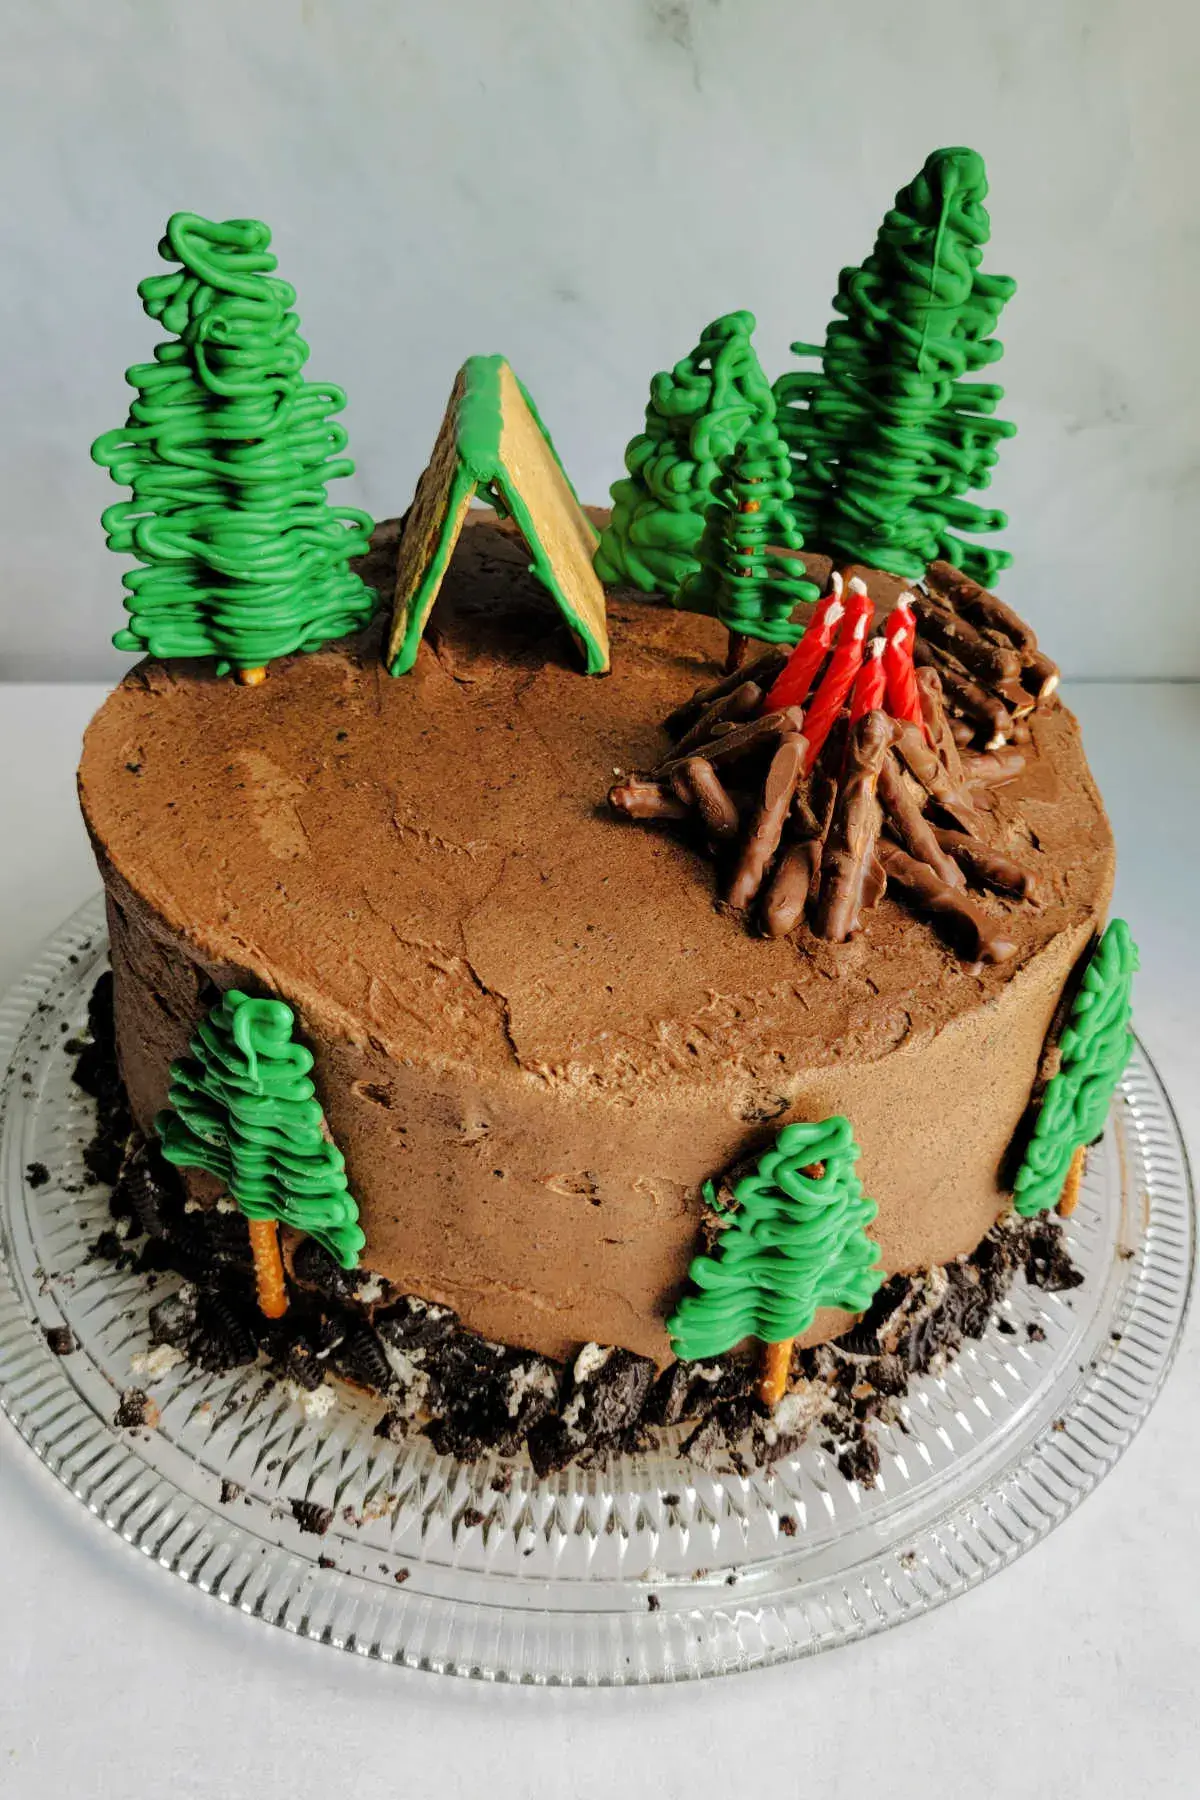 chocolate camping cake with chocolate trees and a candle campfire and tent.